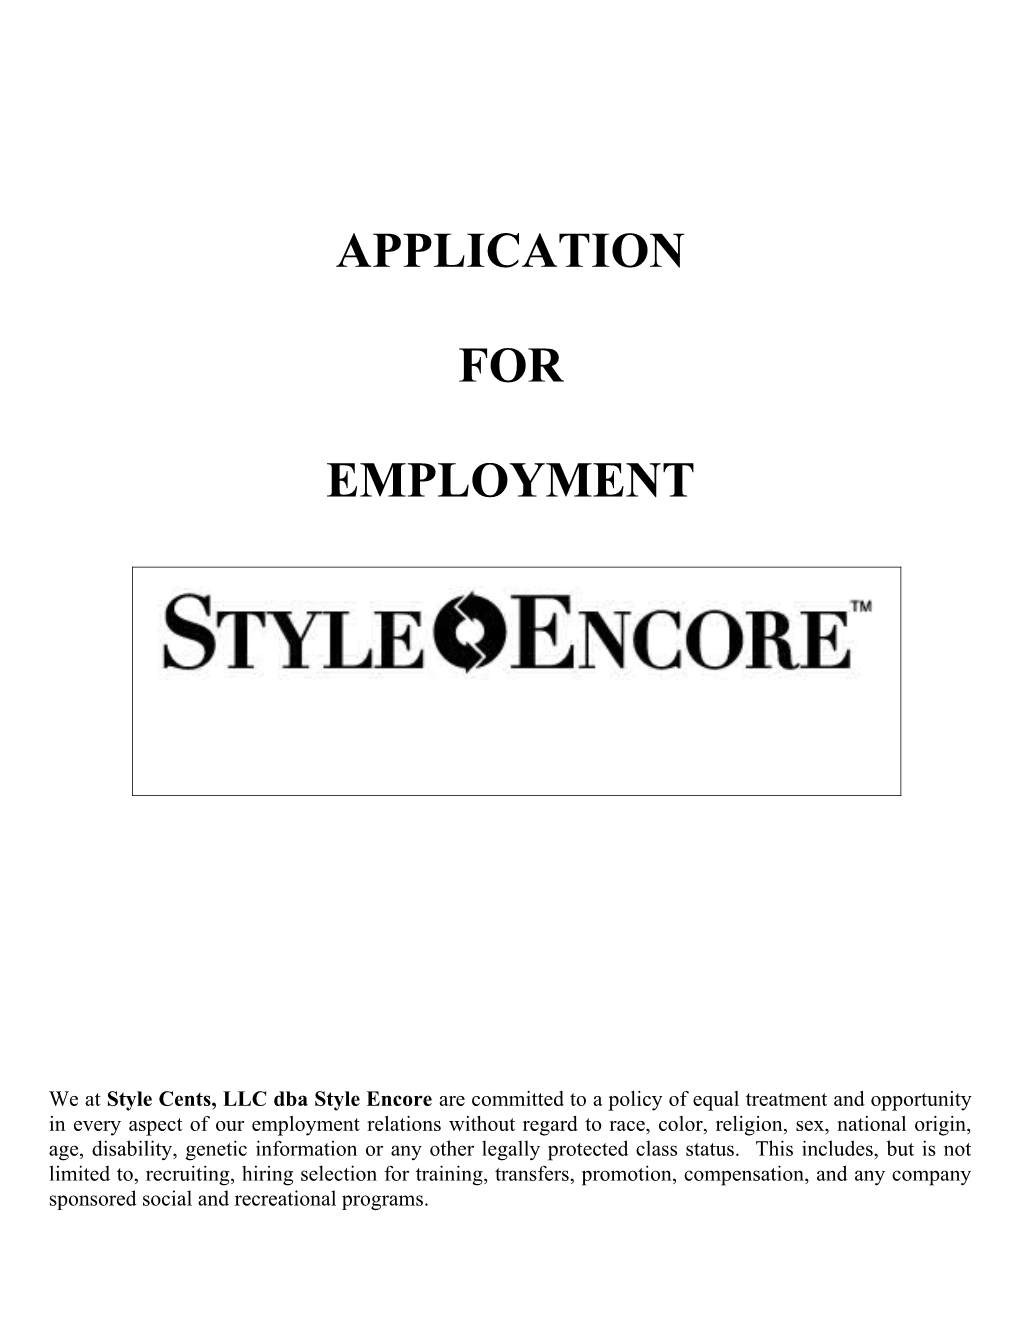 We at Style Cents, LLC Dba Style Encore Are Committed to a Policy of Equal Treatment And